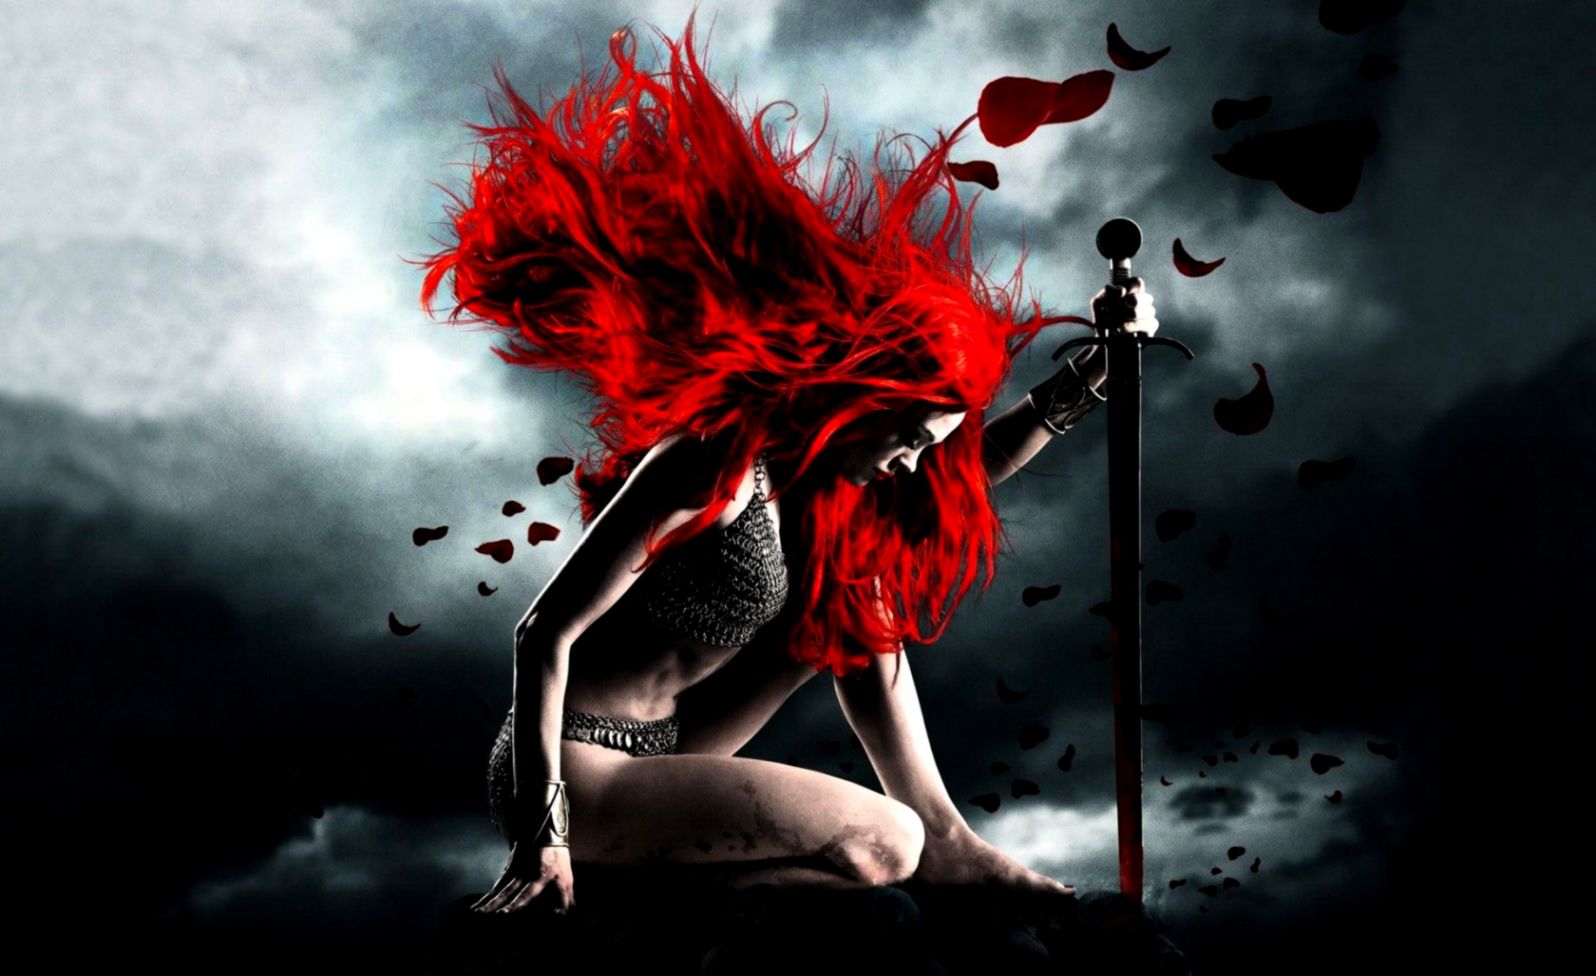 3d Red Head Amazing Fantasy Wallpapers Desktop Background - Red Hair Warrior  Woman - 1596x976 Wallpaper 